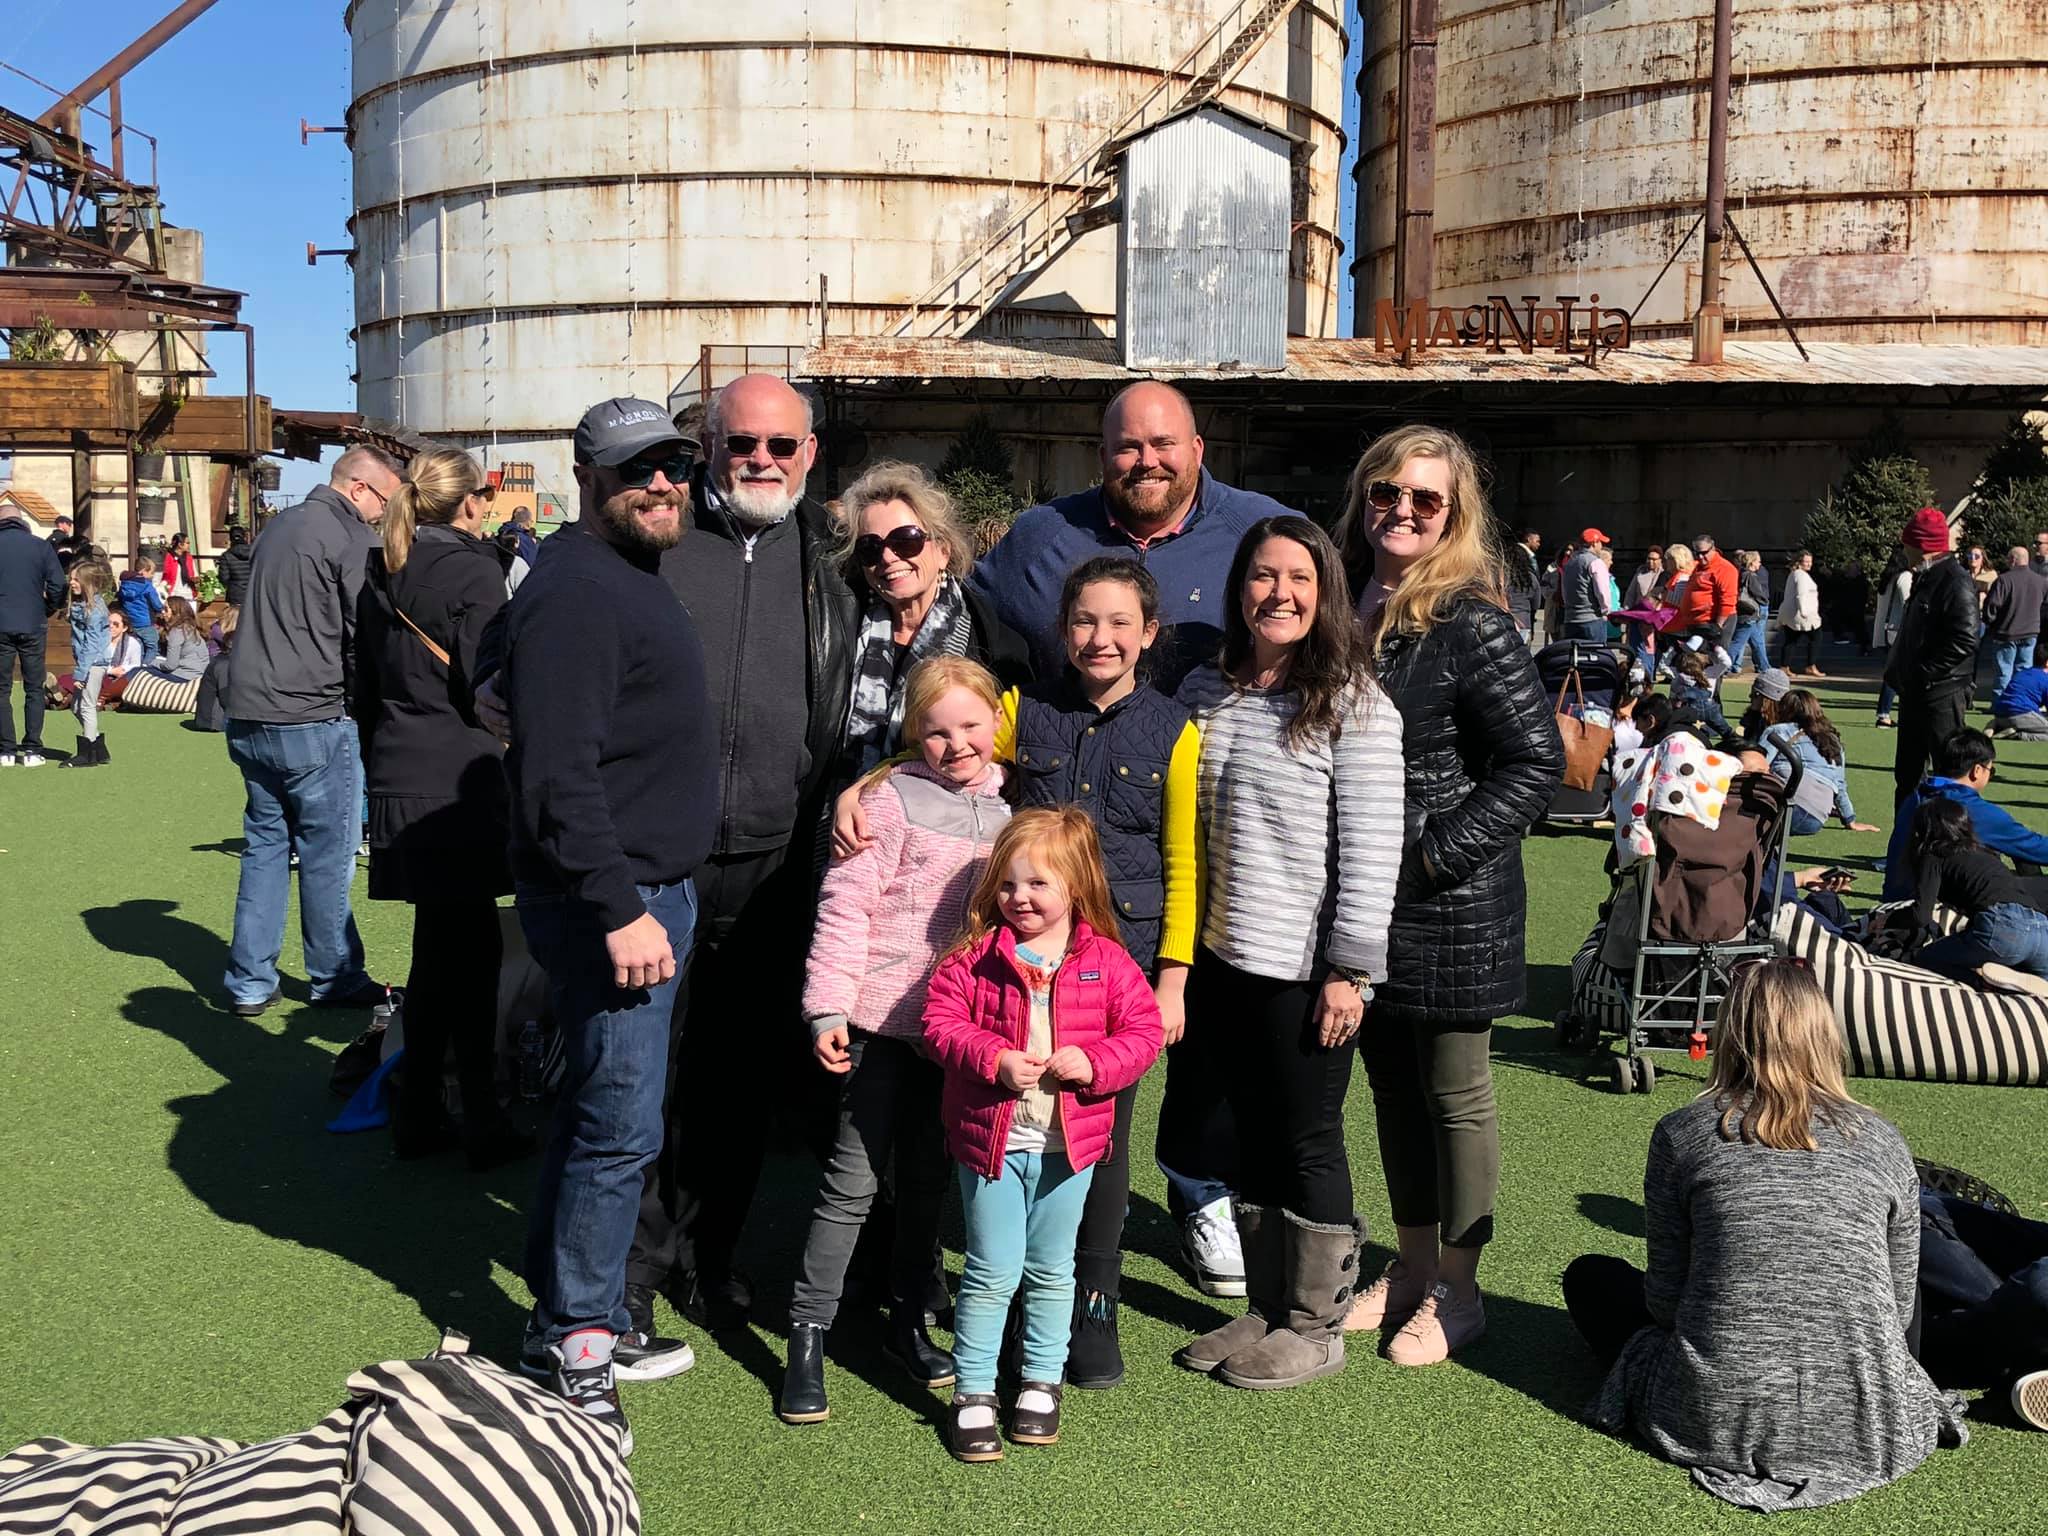 Pool Scouts owner John Breton and his family visiting Magnolia in Waco, Texas